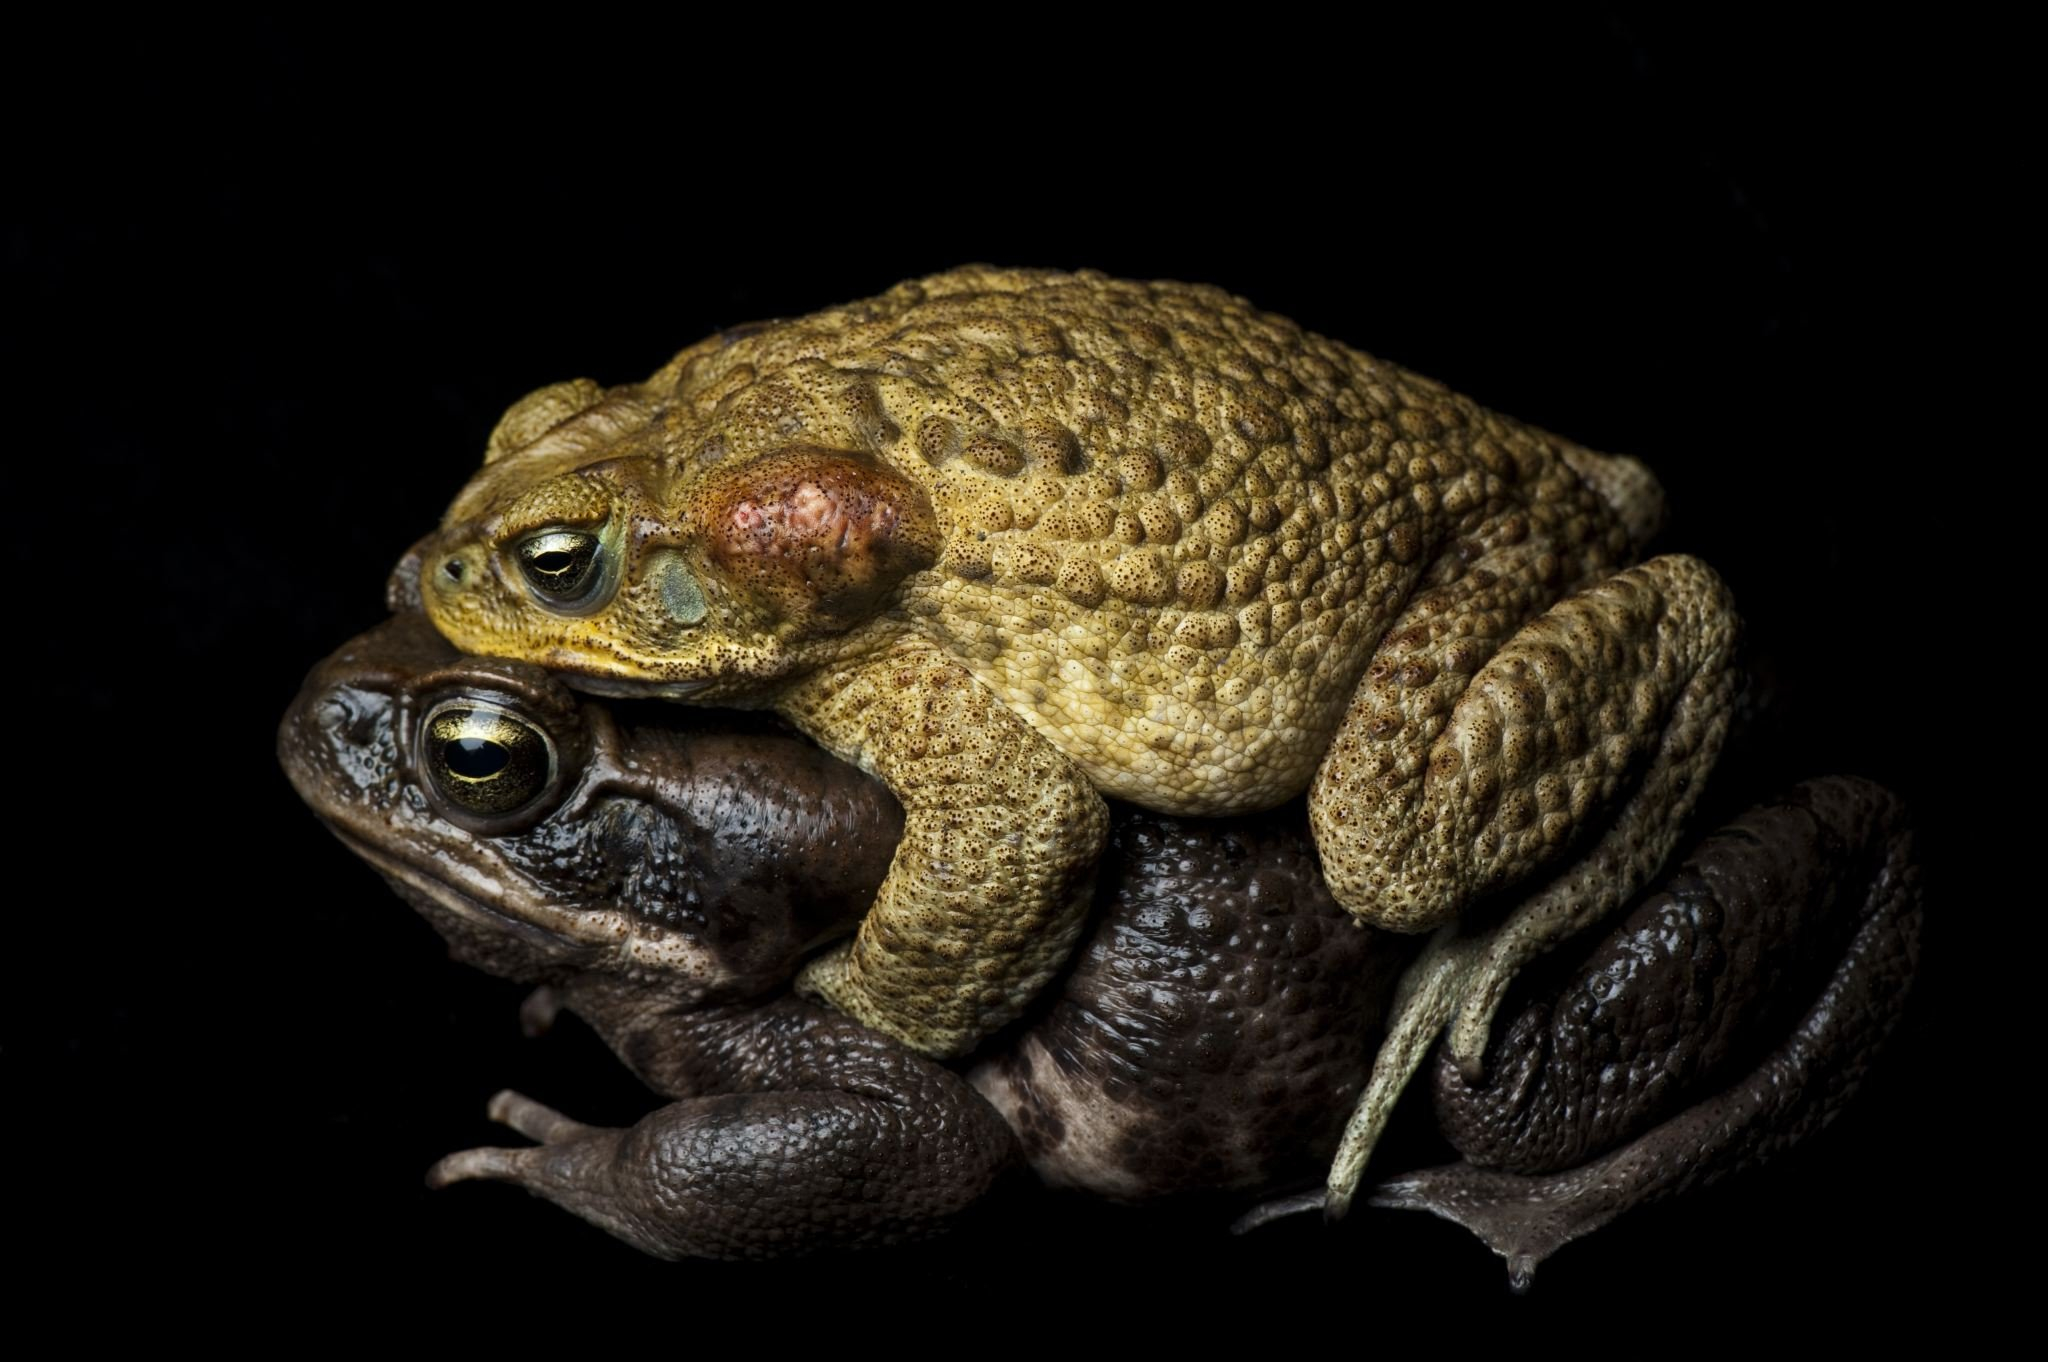 Cane Toad  National Geographic With Cane Toads Video Worksheet Answers